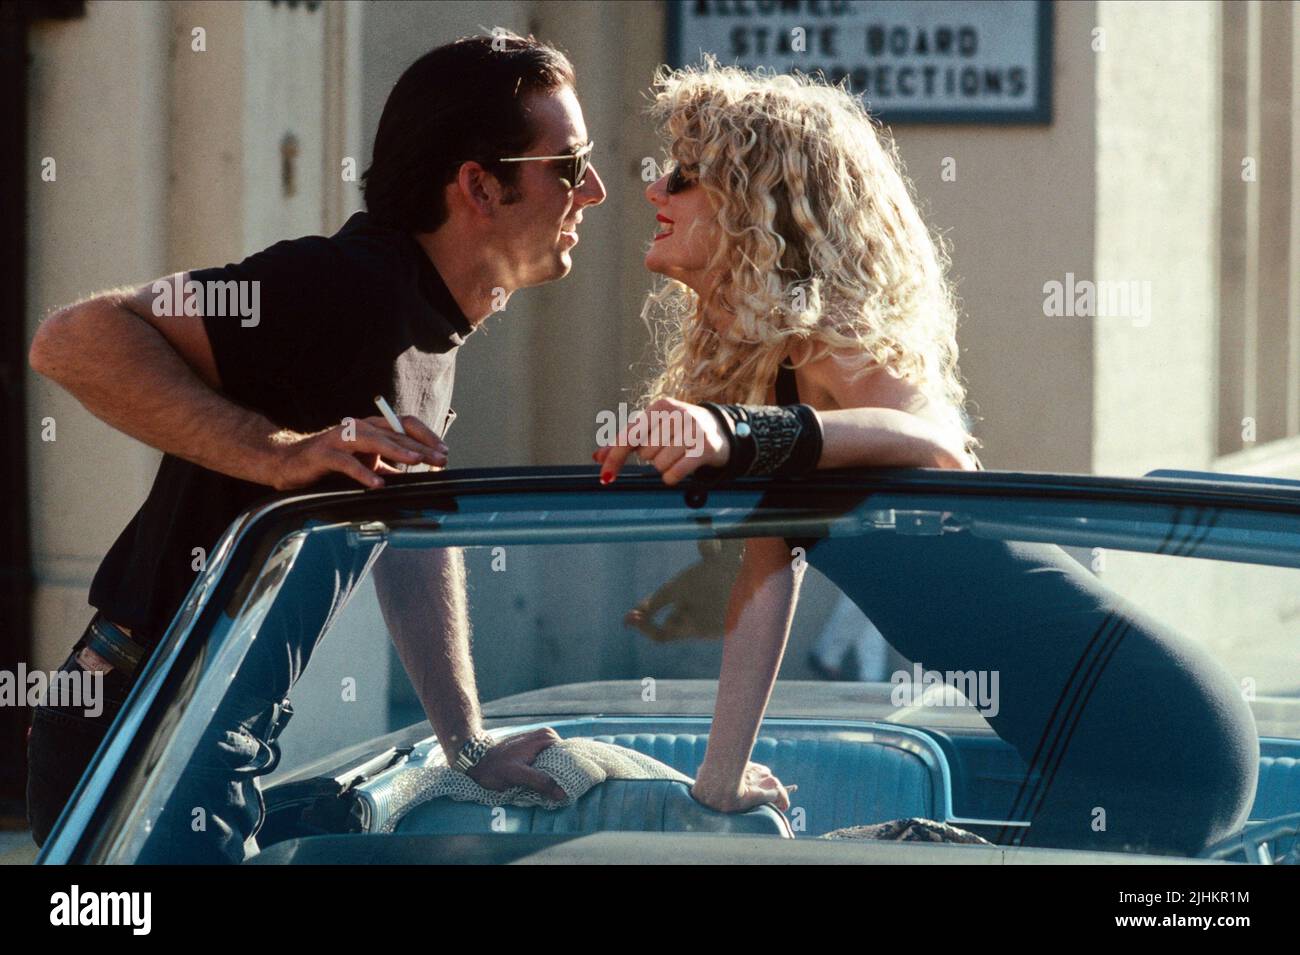 17 behind the scenes photos from Wild at Heart (1990) - Laura Dern,  Nicolas Cage, David Lynch, Isabella Rossellini, Willem Dafoe, and more :  r/movies